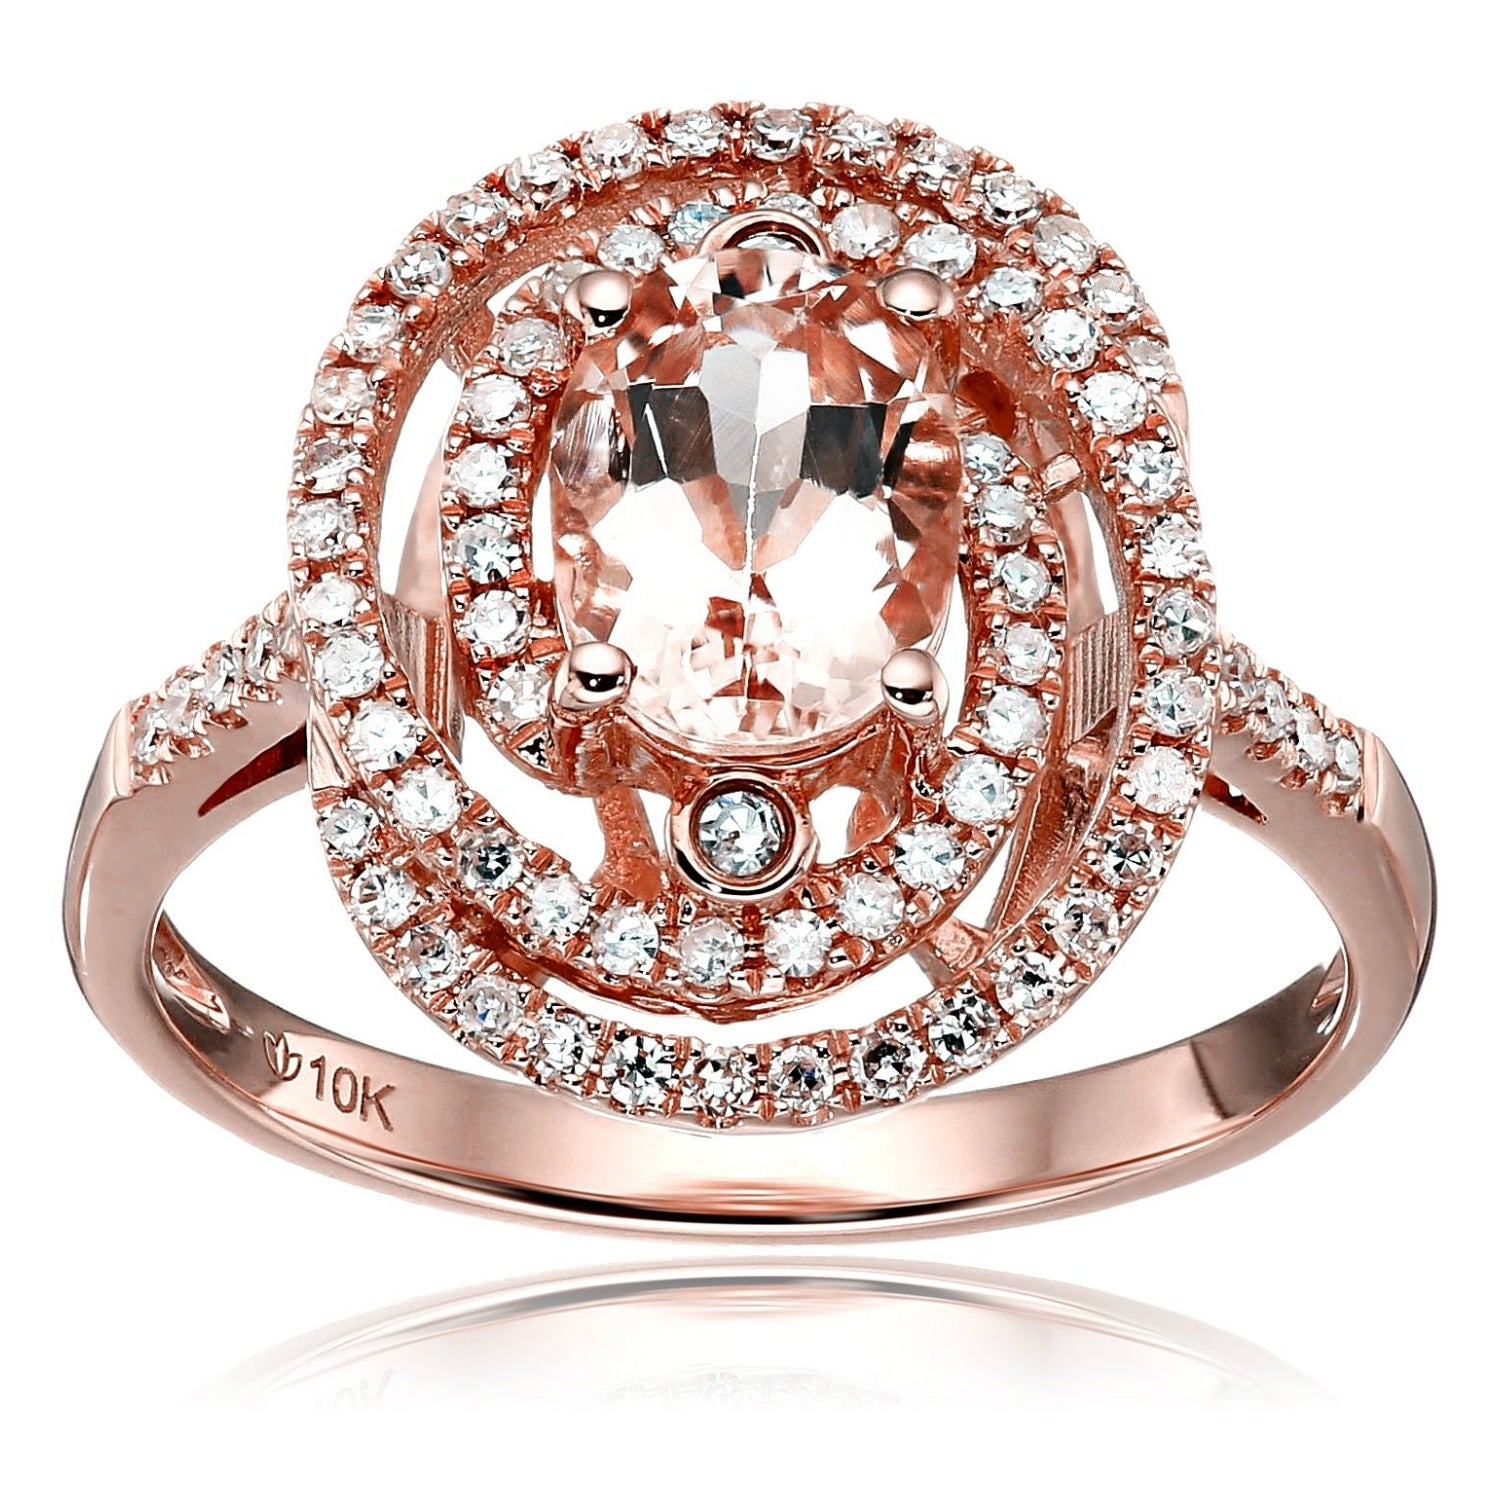 10k Rose Gold Morganite and Diamond Double Swirl Halo Oval Engagement Ring (1/3cttw, H-I Color, I1-I2 Clarity), - pinctore